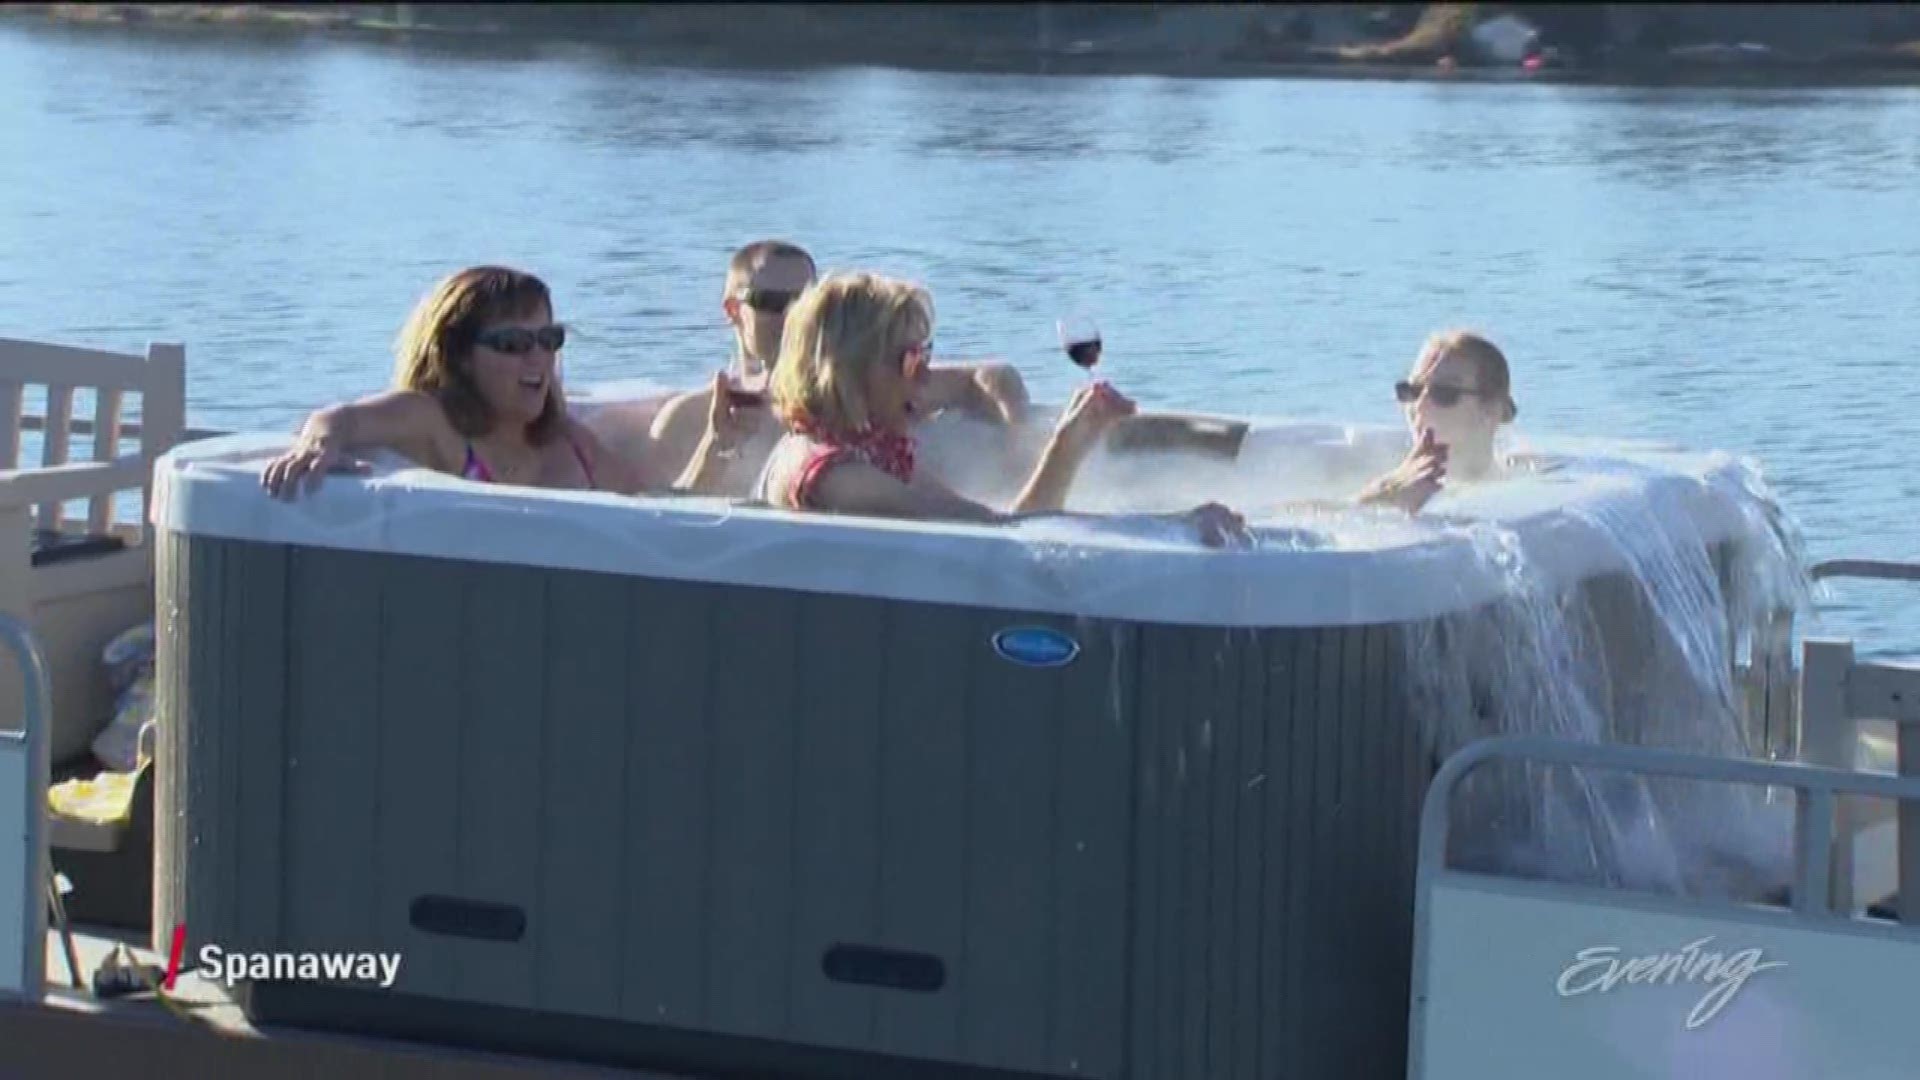 One-of-a-kind craft makes a pontoon boat a party